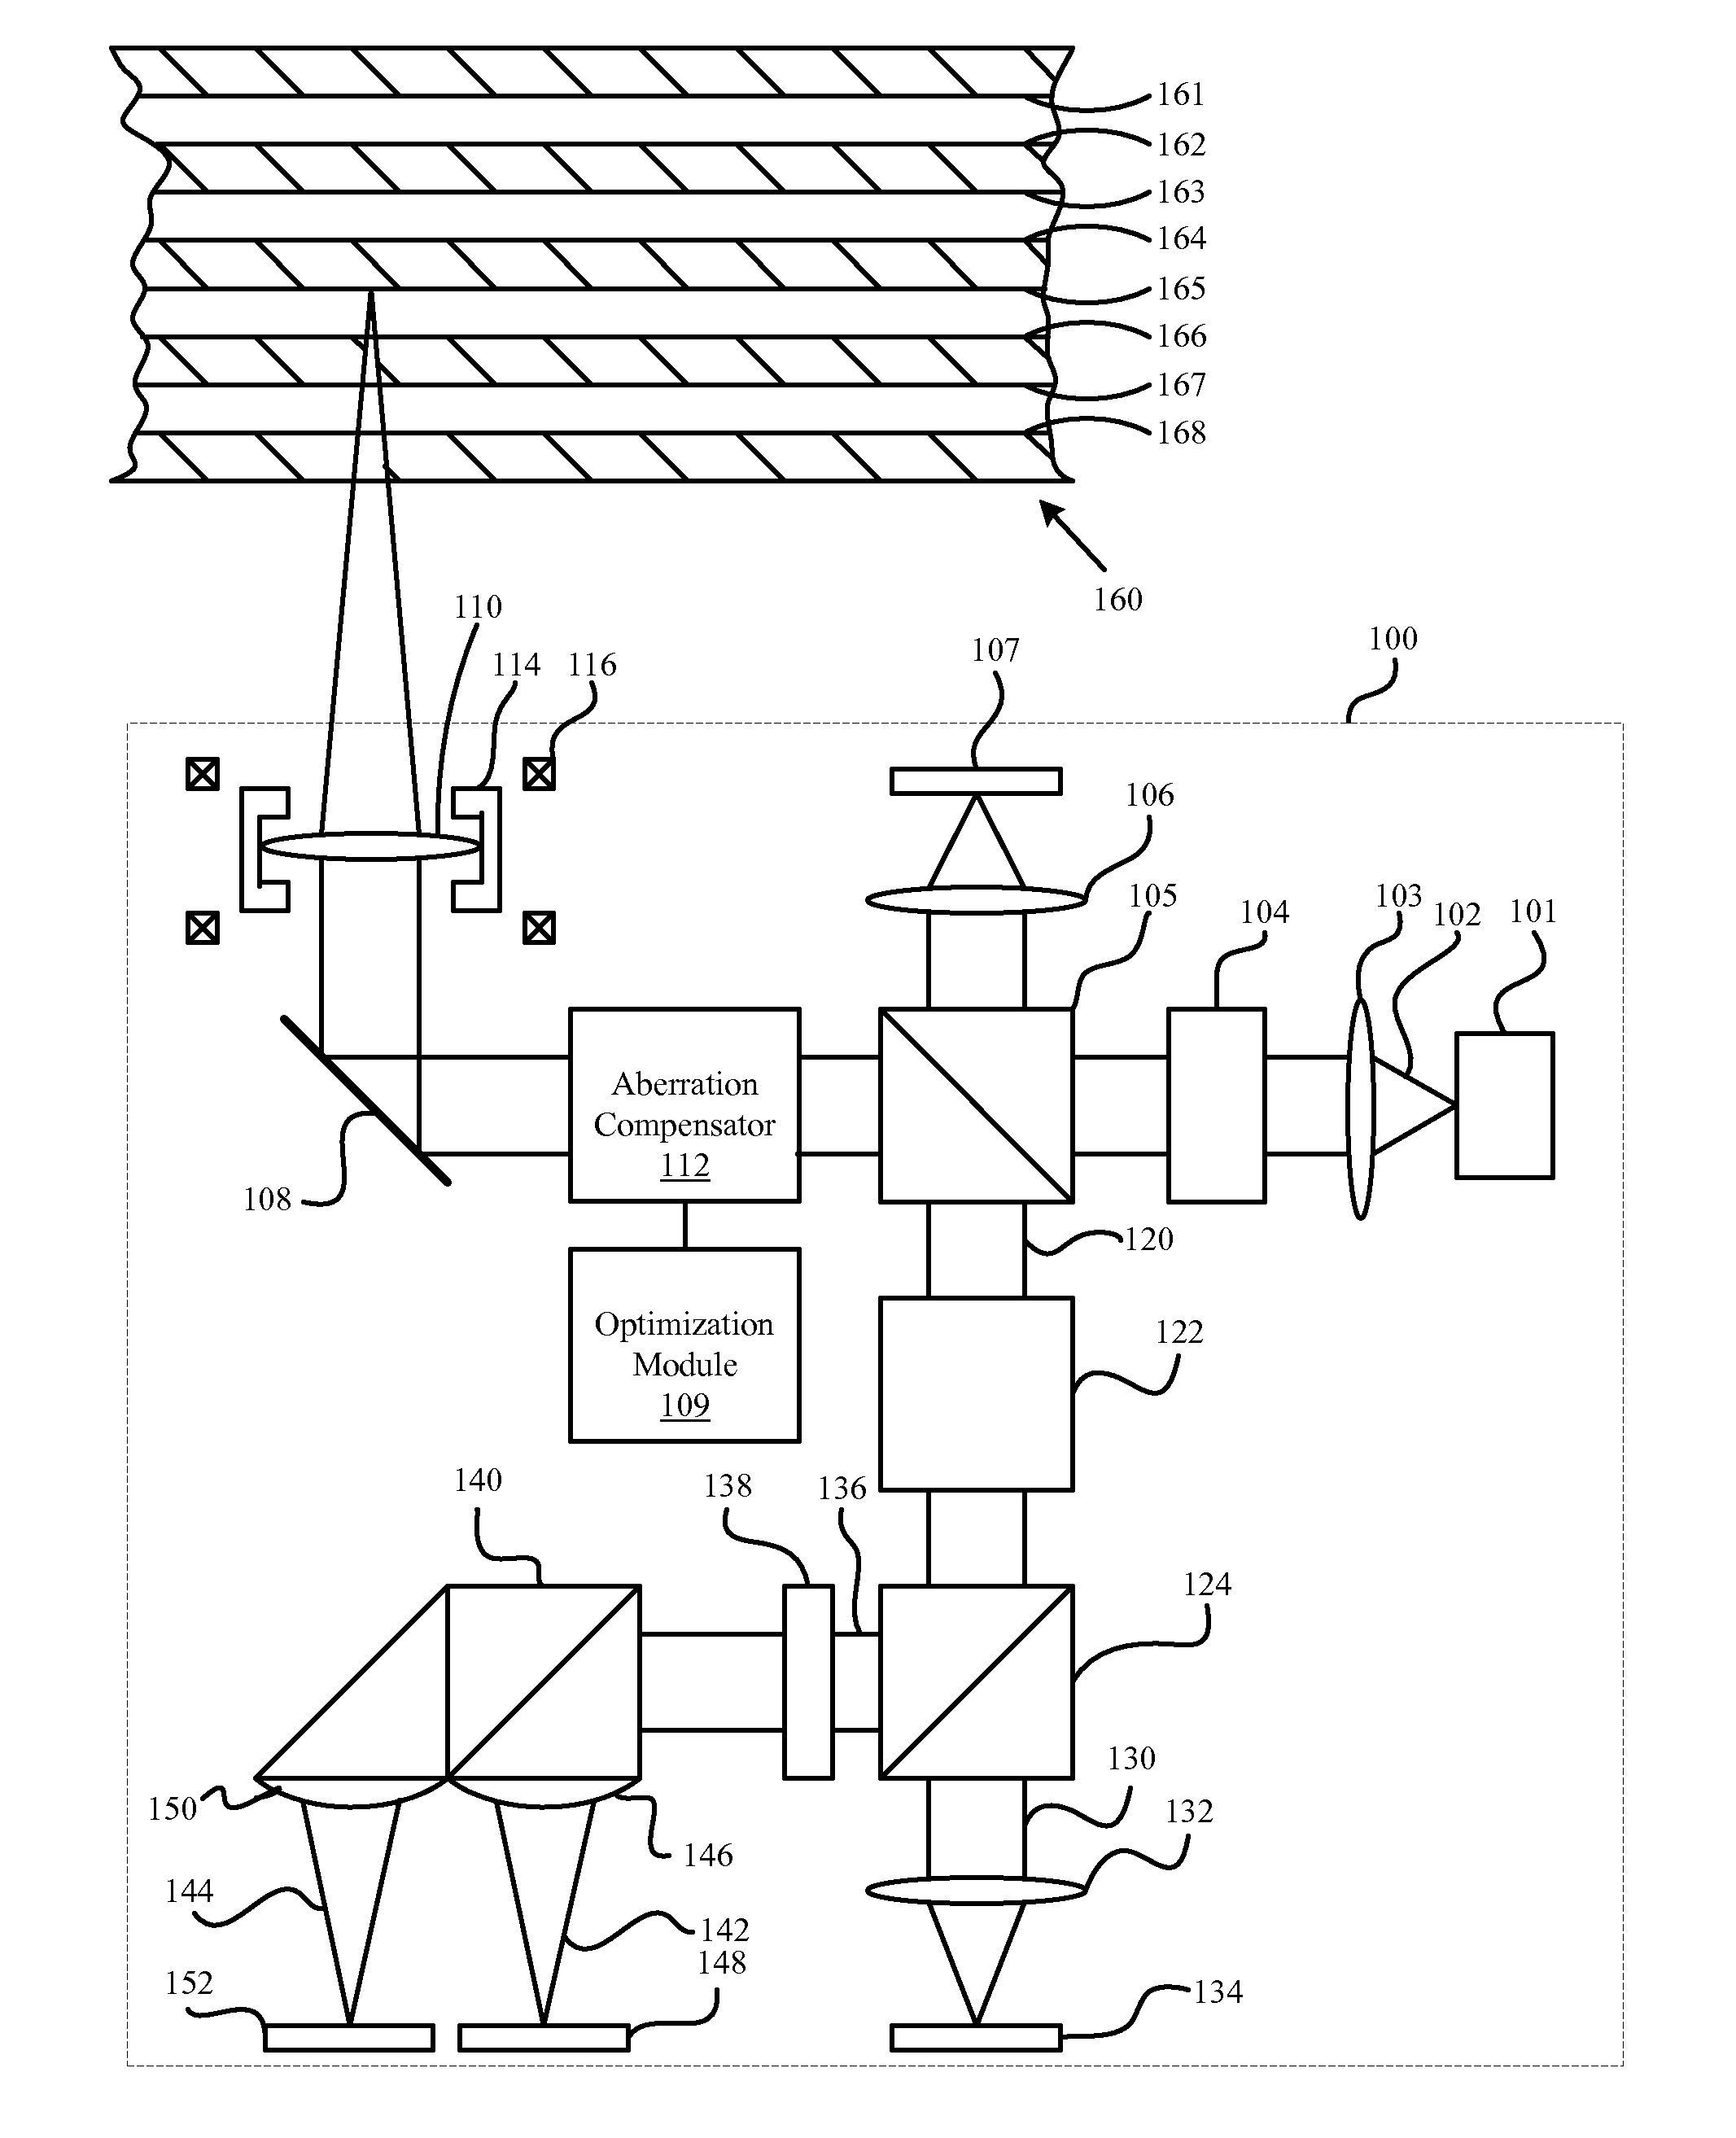 Multi-layered media aberration compensation apparatus, method, and system